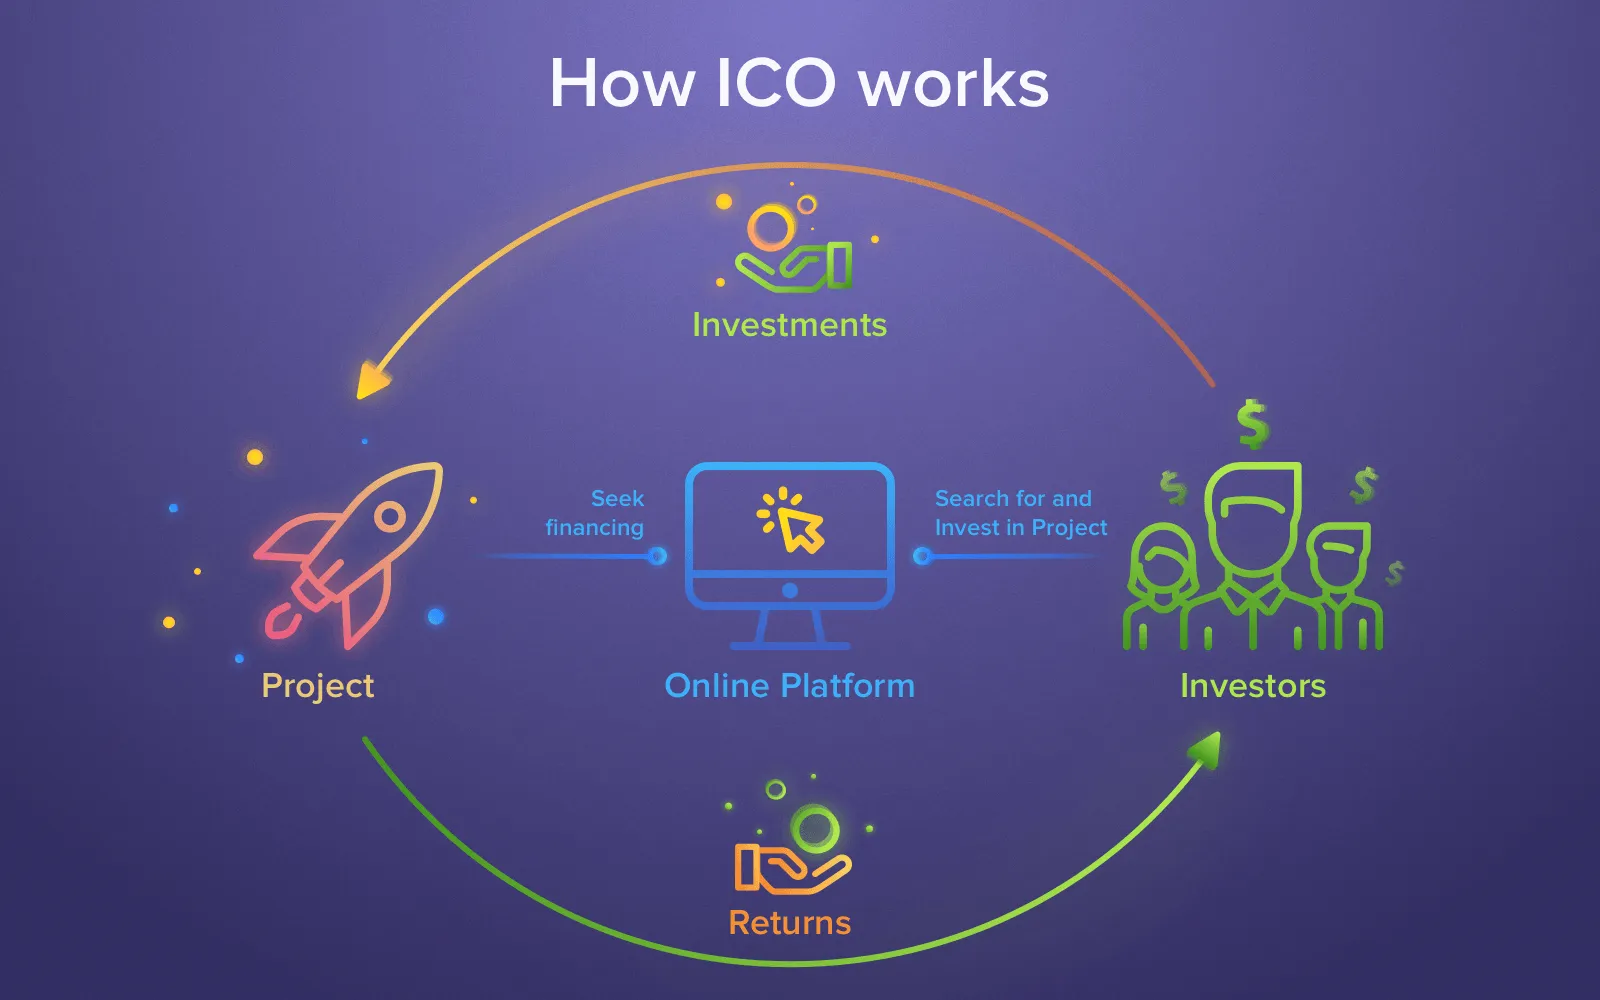 ICO investment: How it works